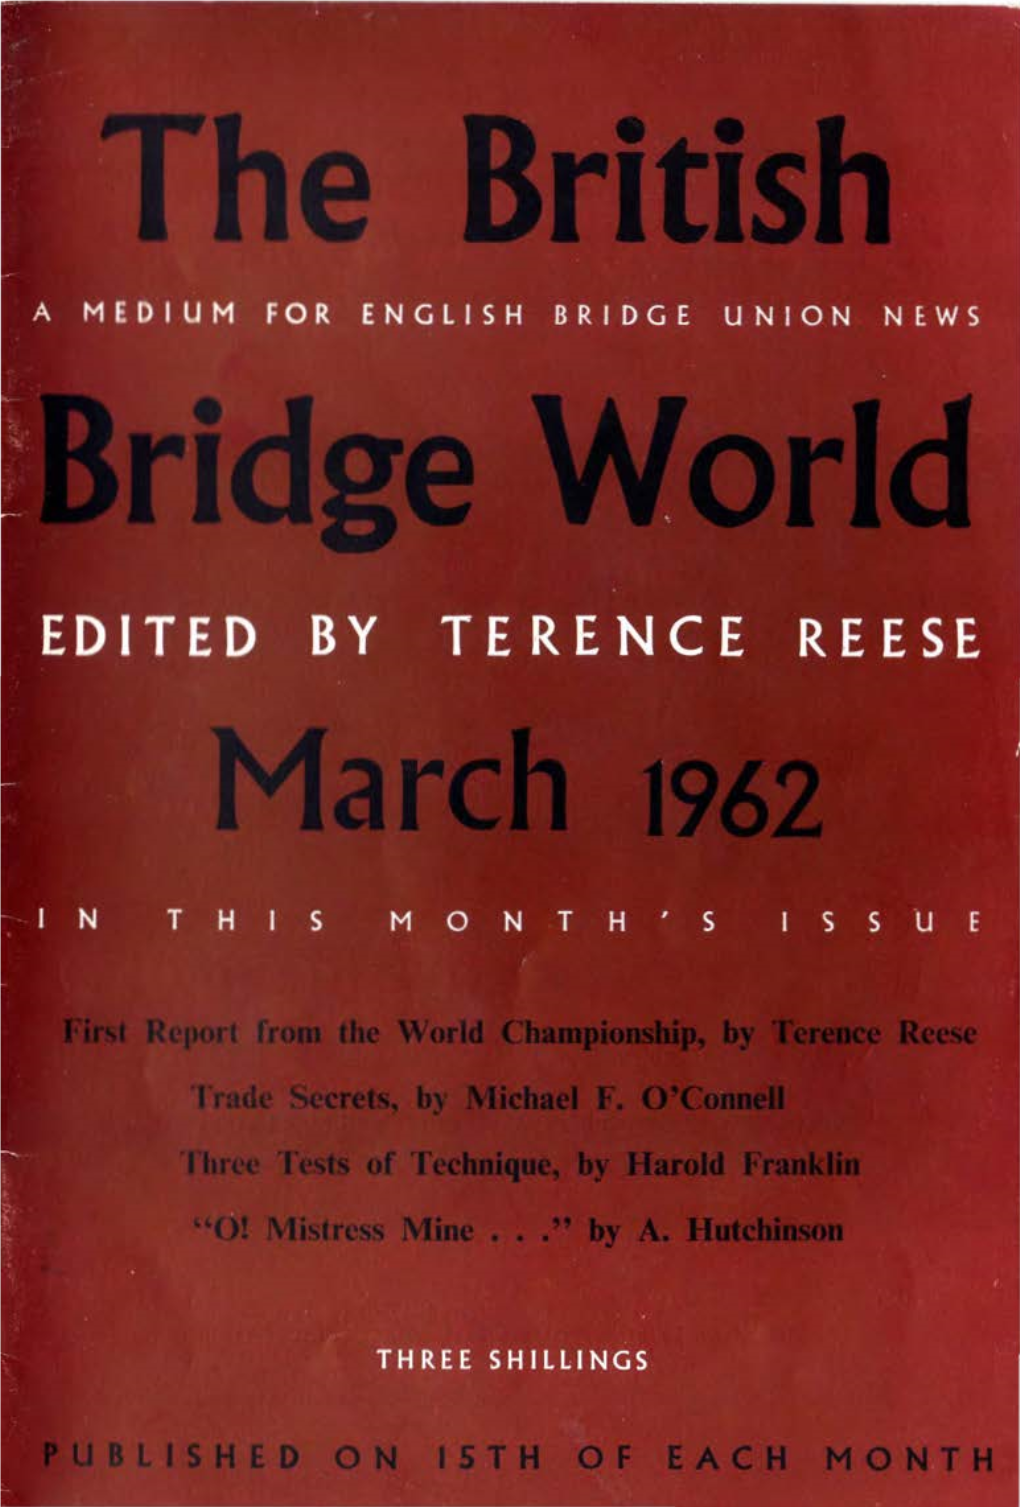 March 1962 NUMBER3